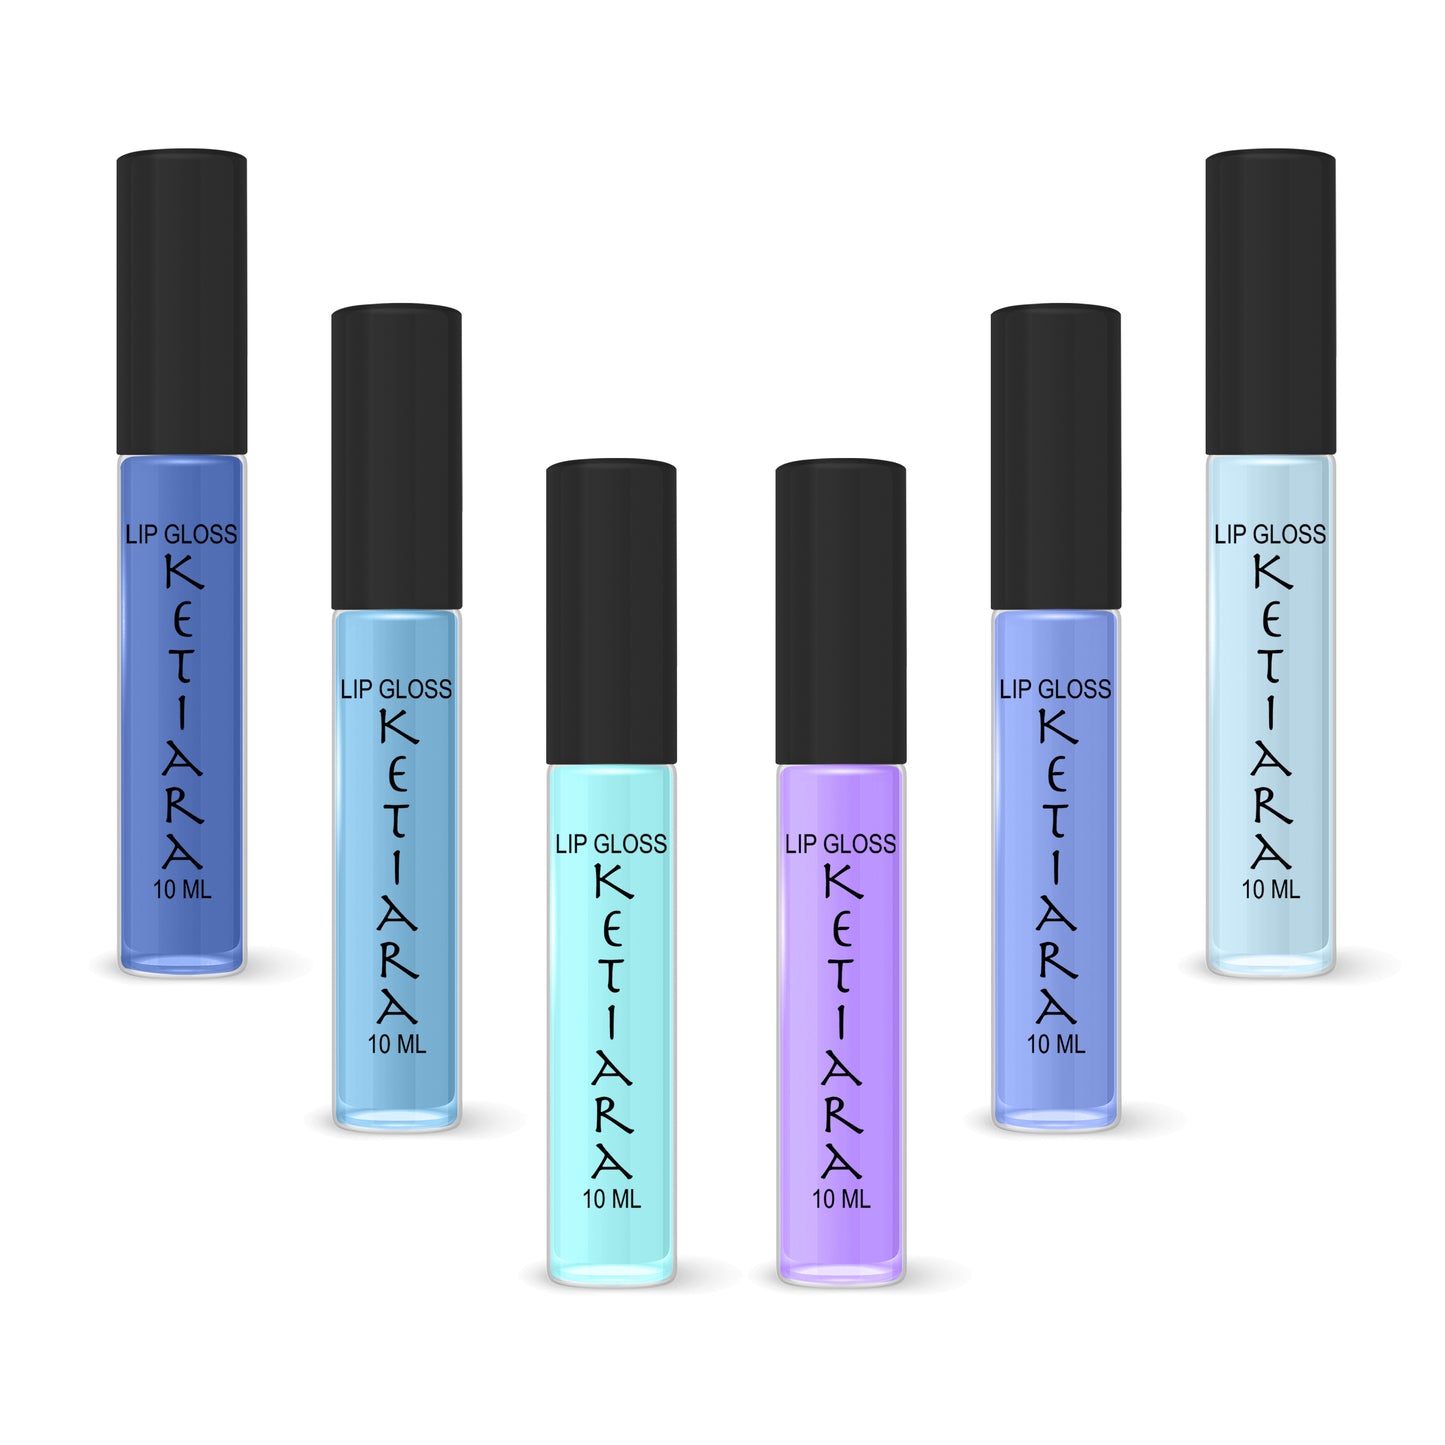 Mint Hydrating And Moisturizing Non-sticky Premium Mild Tinting Lip Gloss Infused With Hyaluronic Acid | Pack Of 6